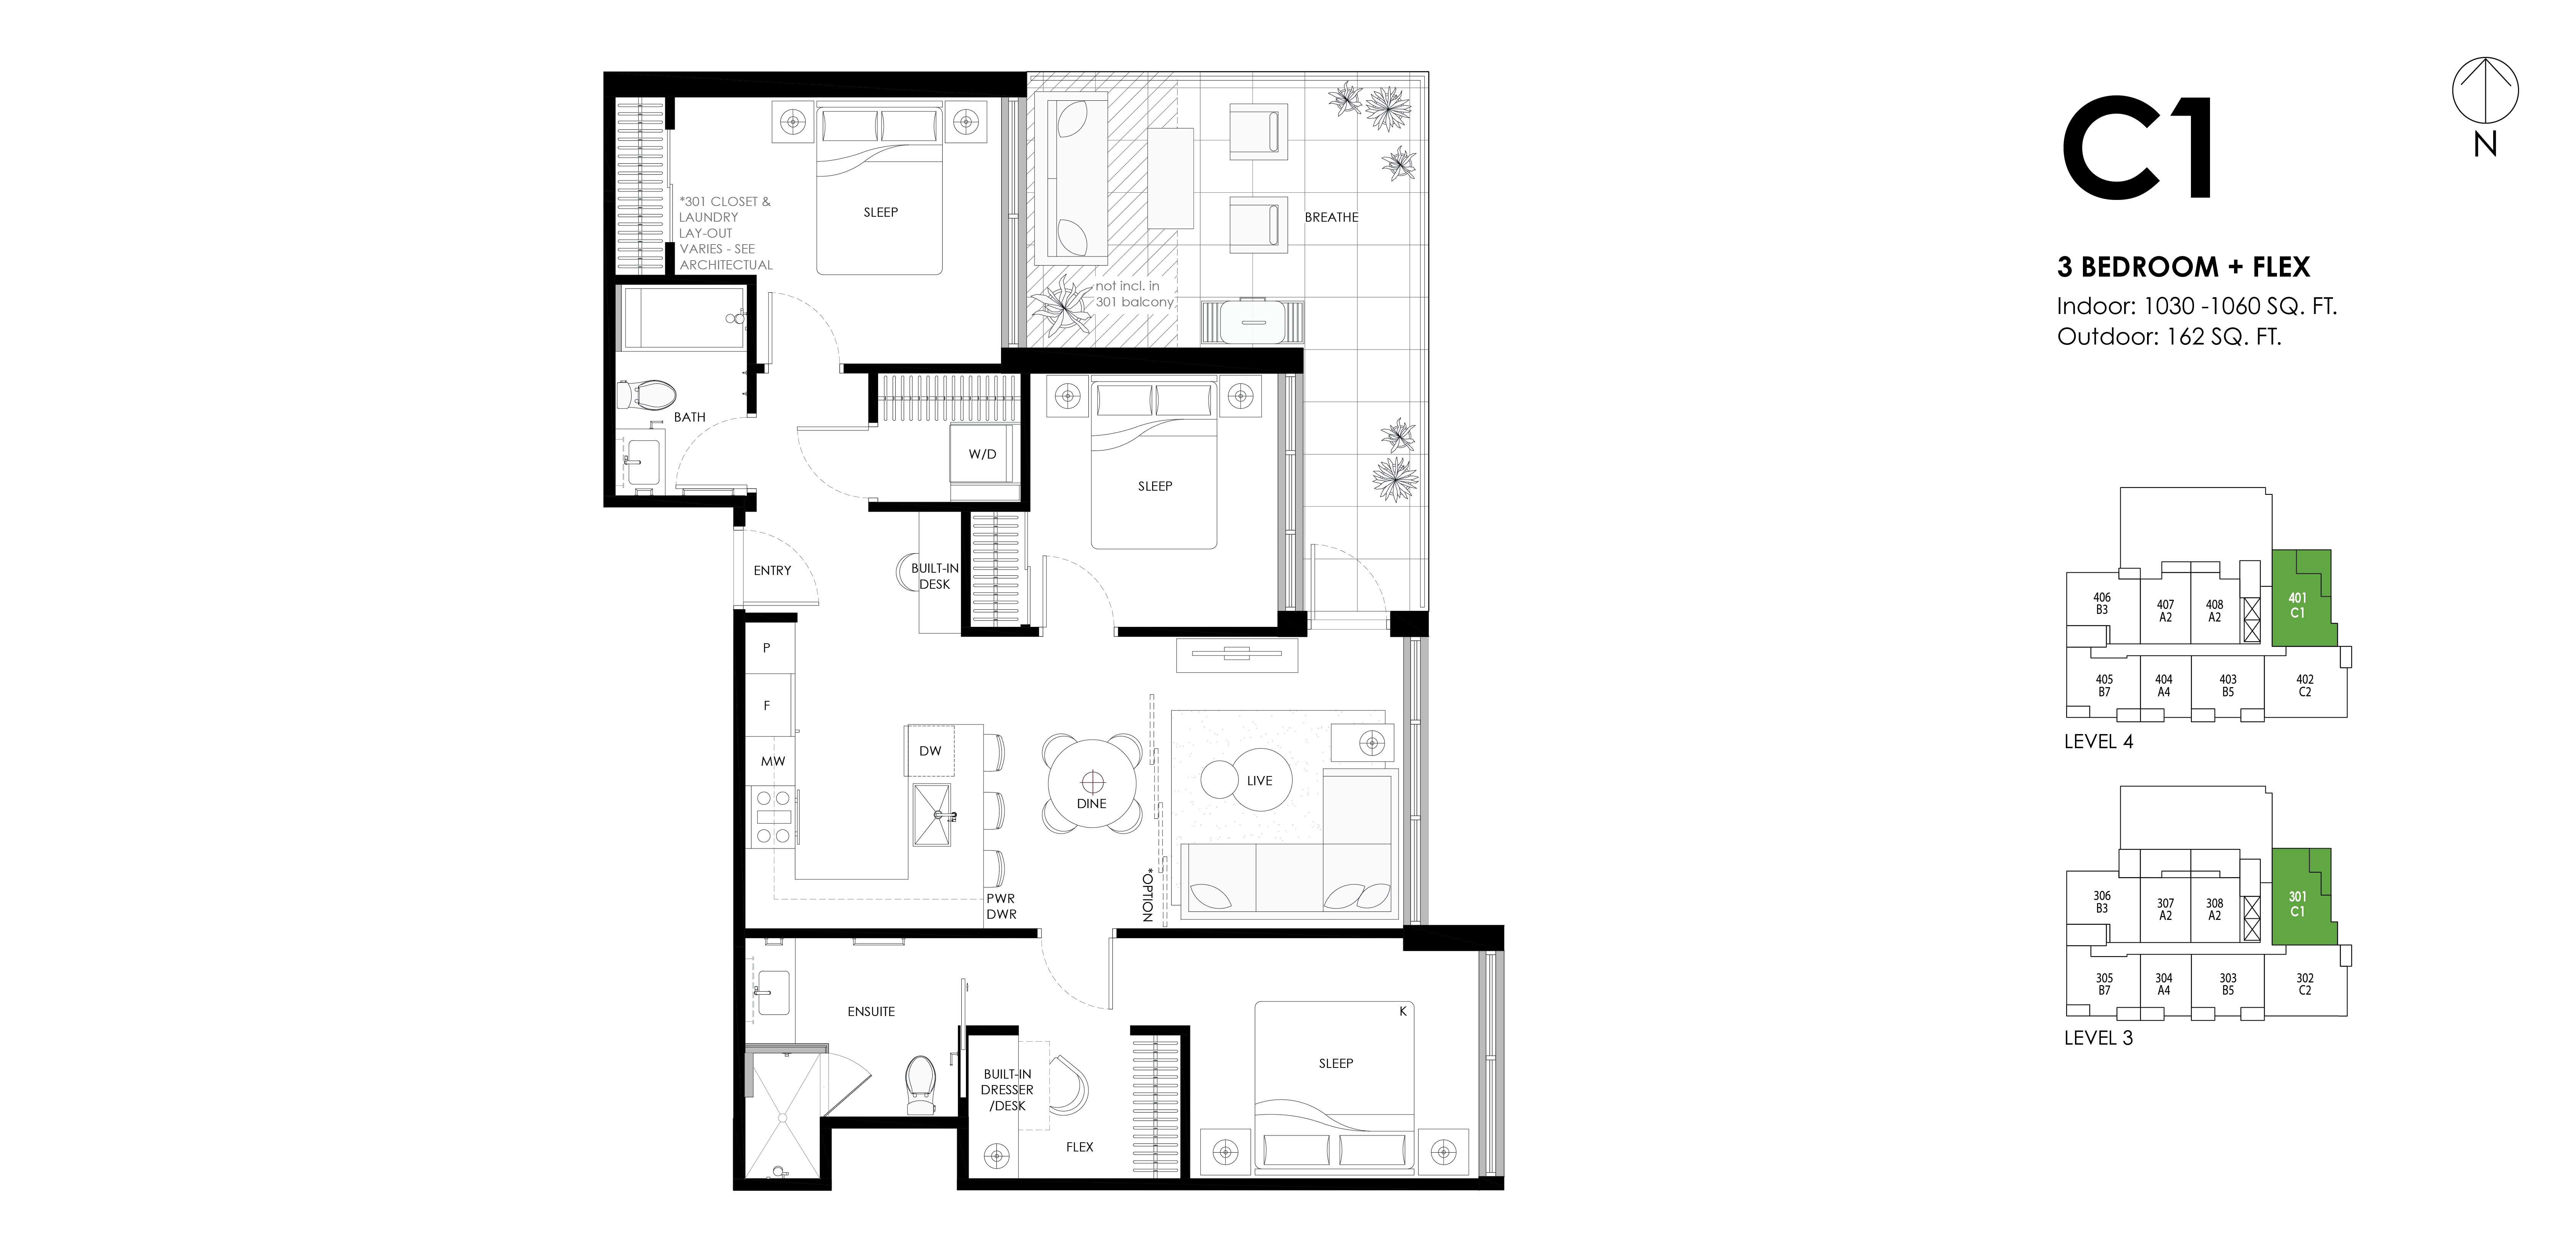 C1 Floor Plan of Ava Condos with undefined beds